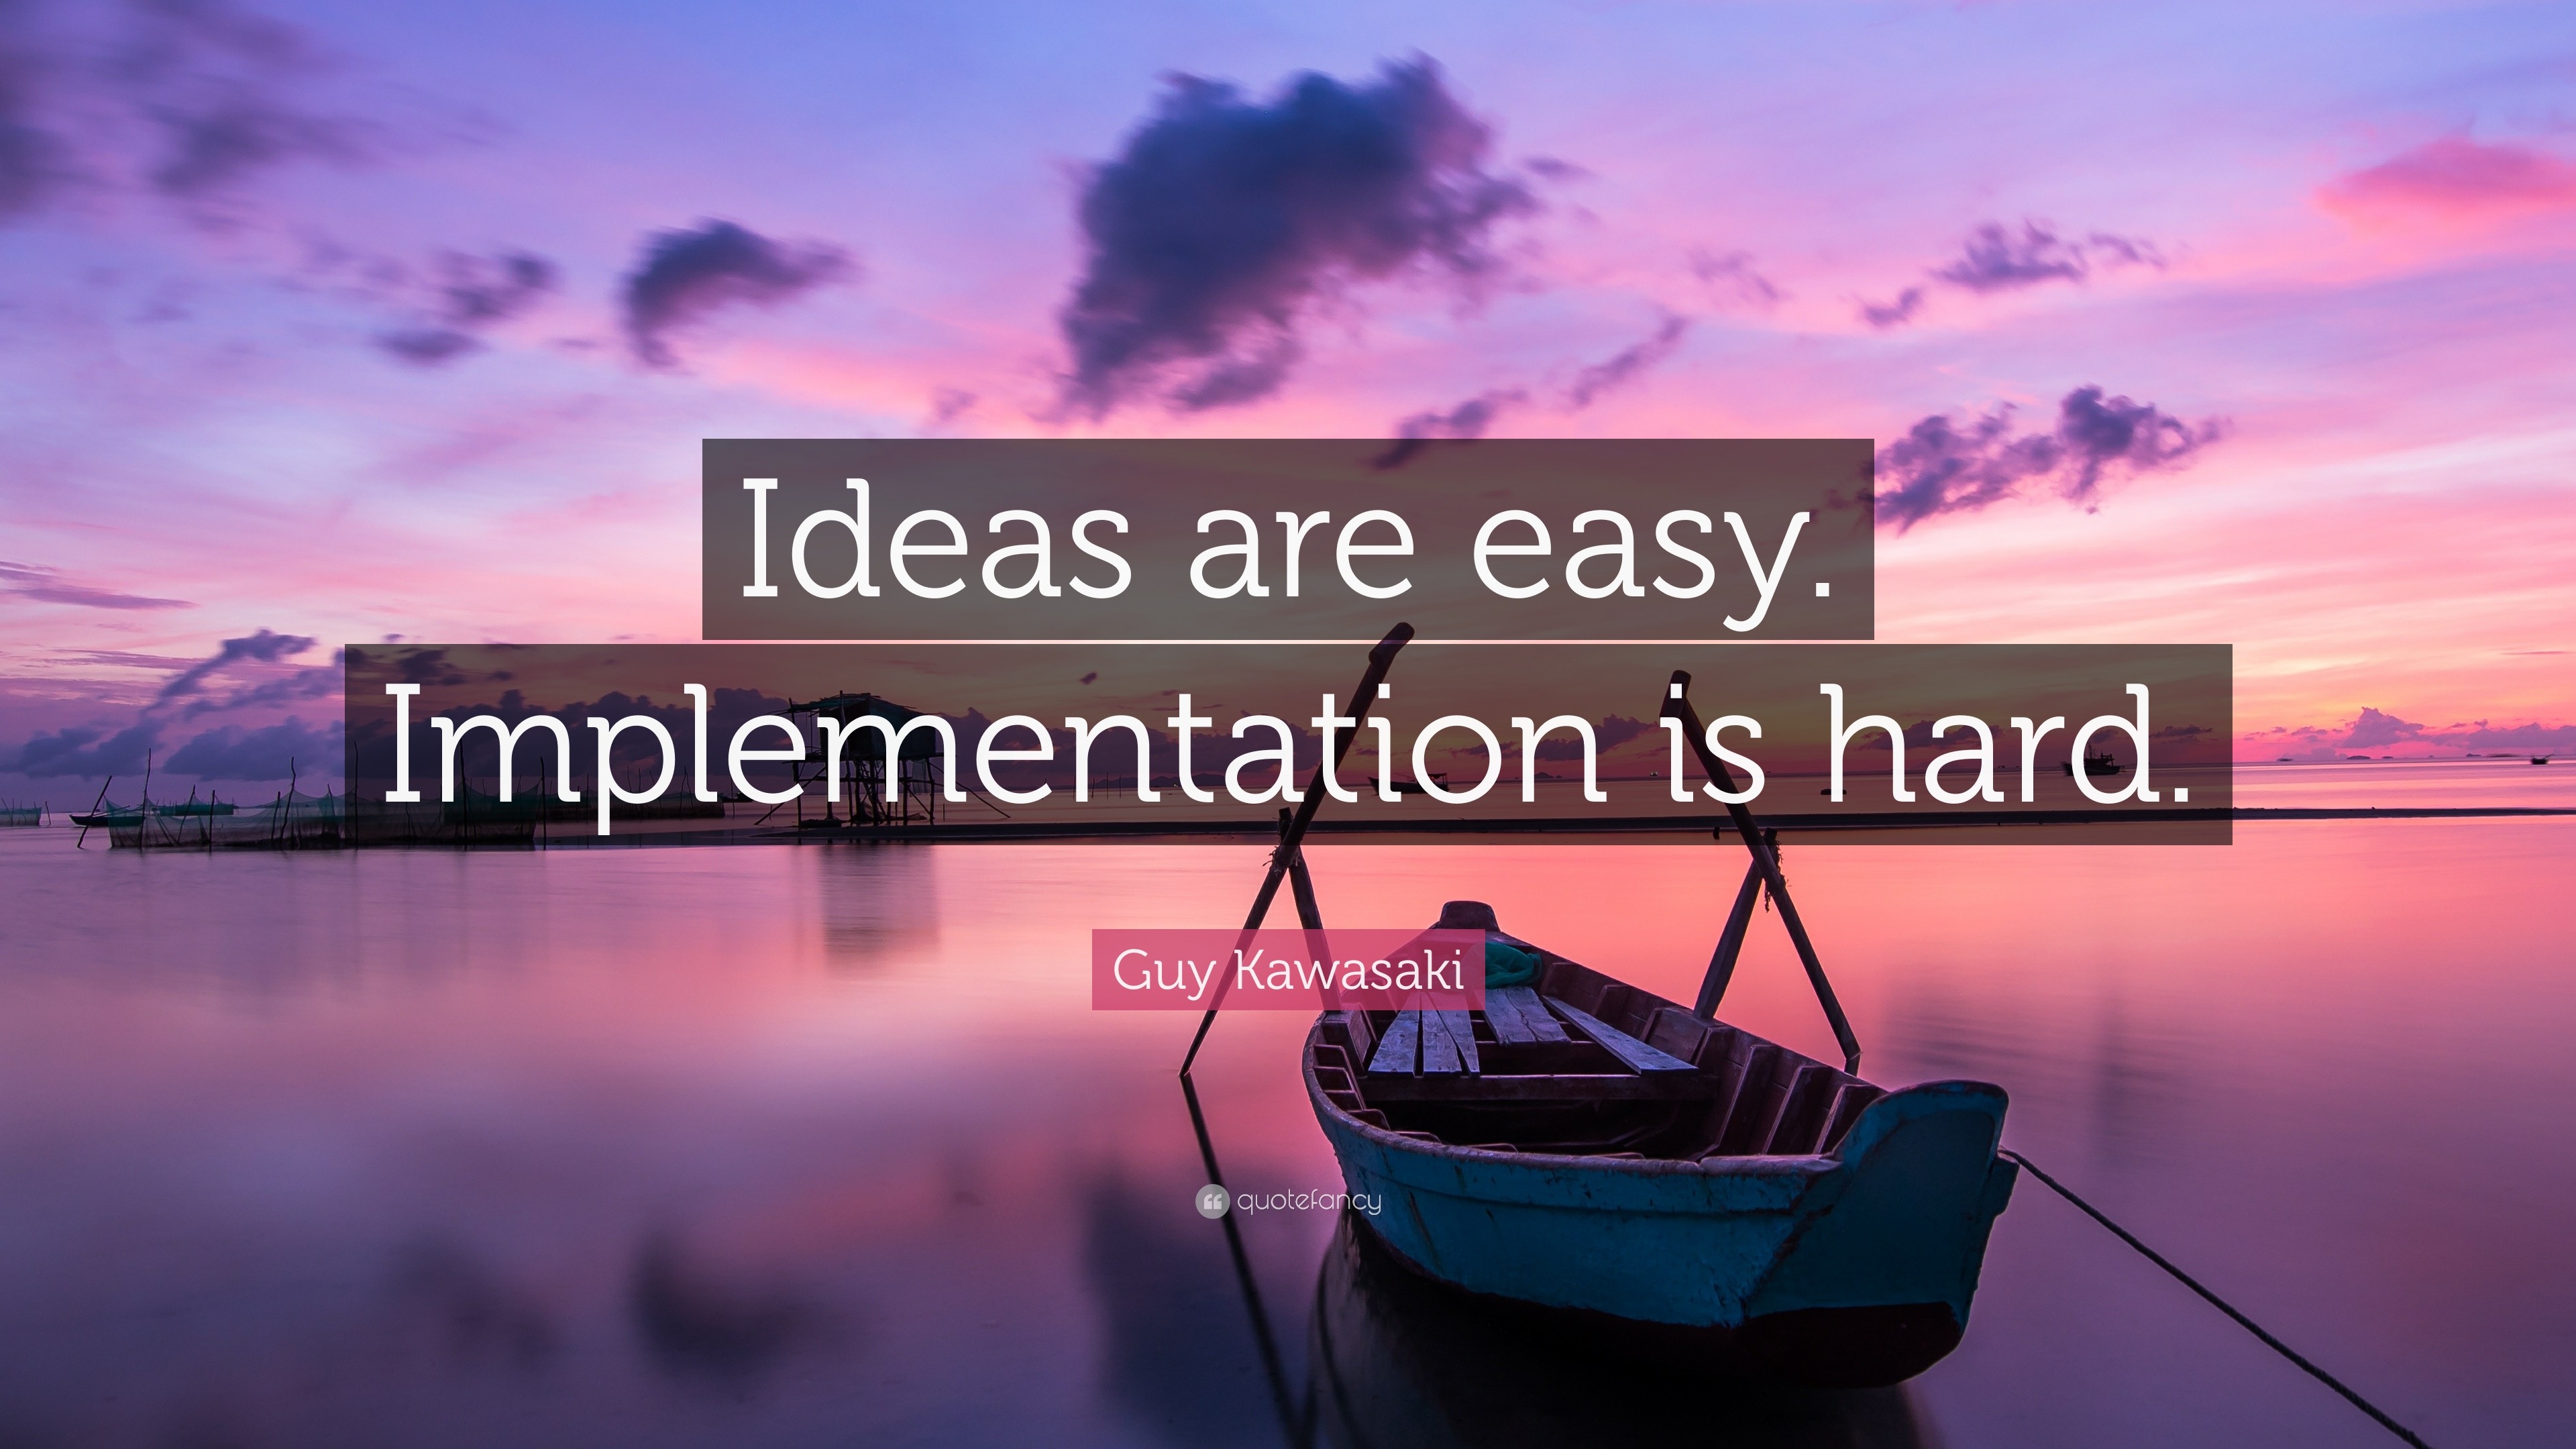 Guy Kawasaki Quote: “Ideas are easy. Implementation is hard.” (29